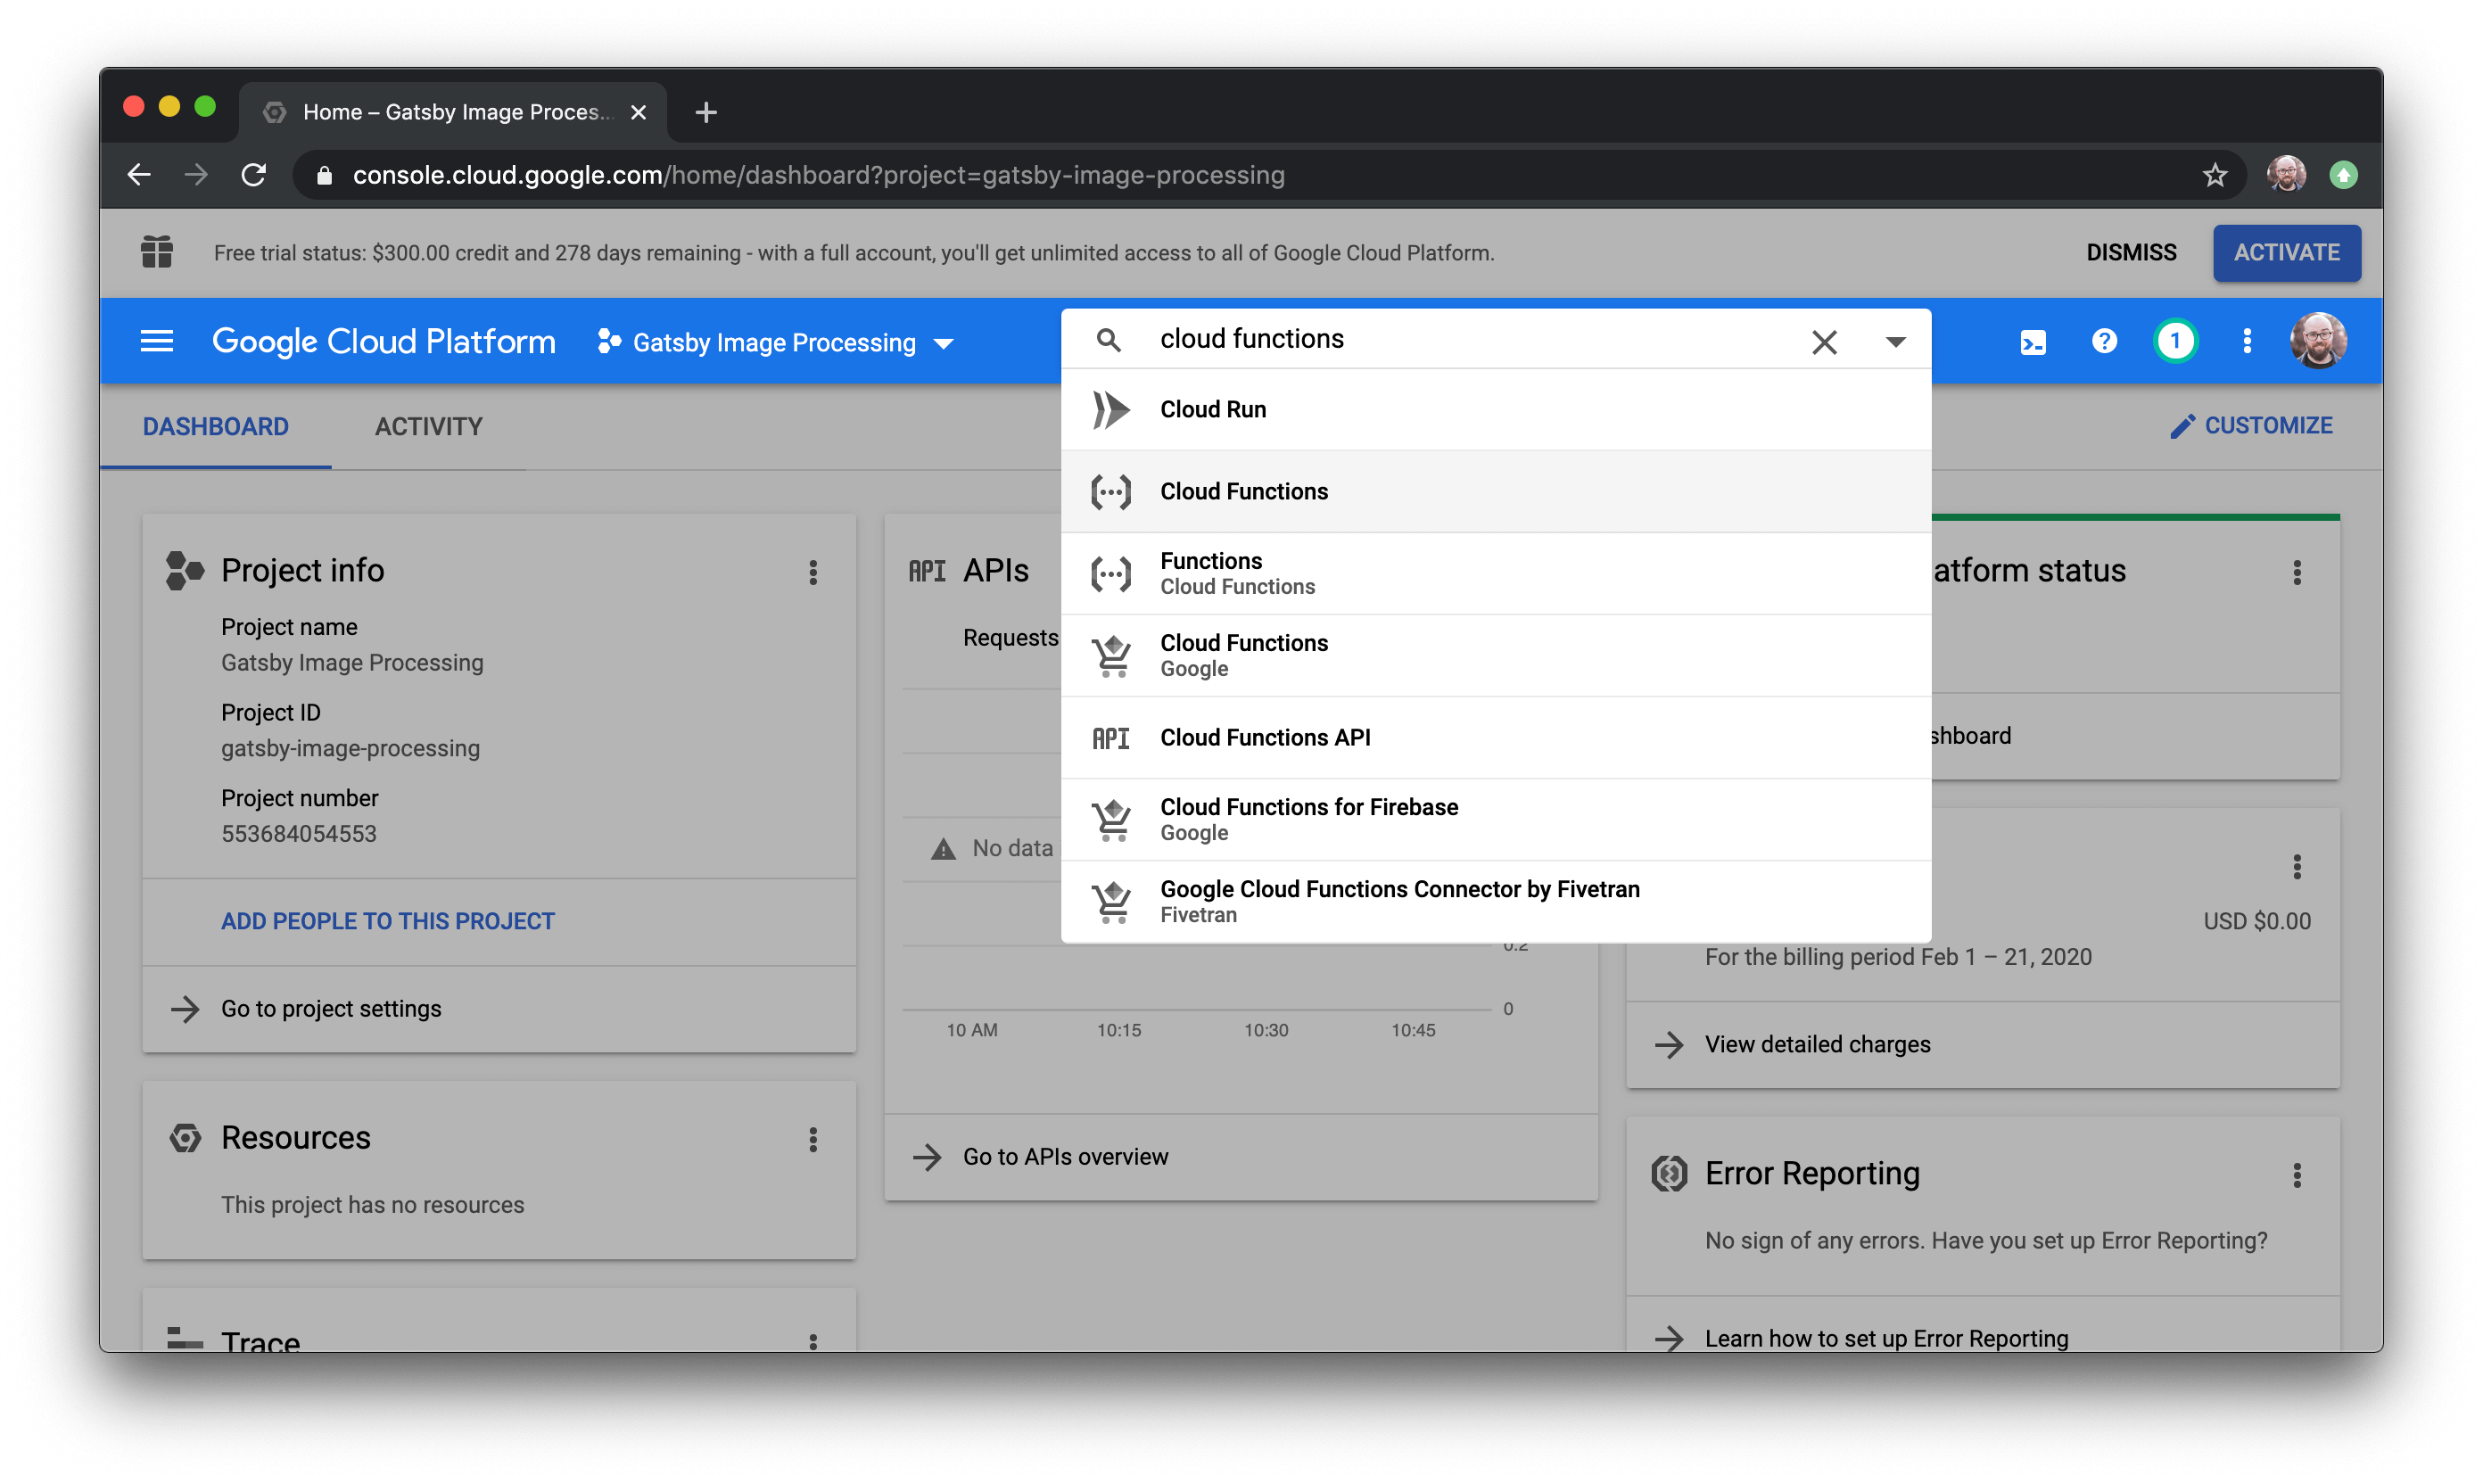 Cloud Functions selected in the dropdown.